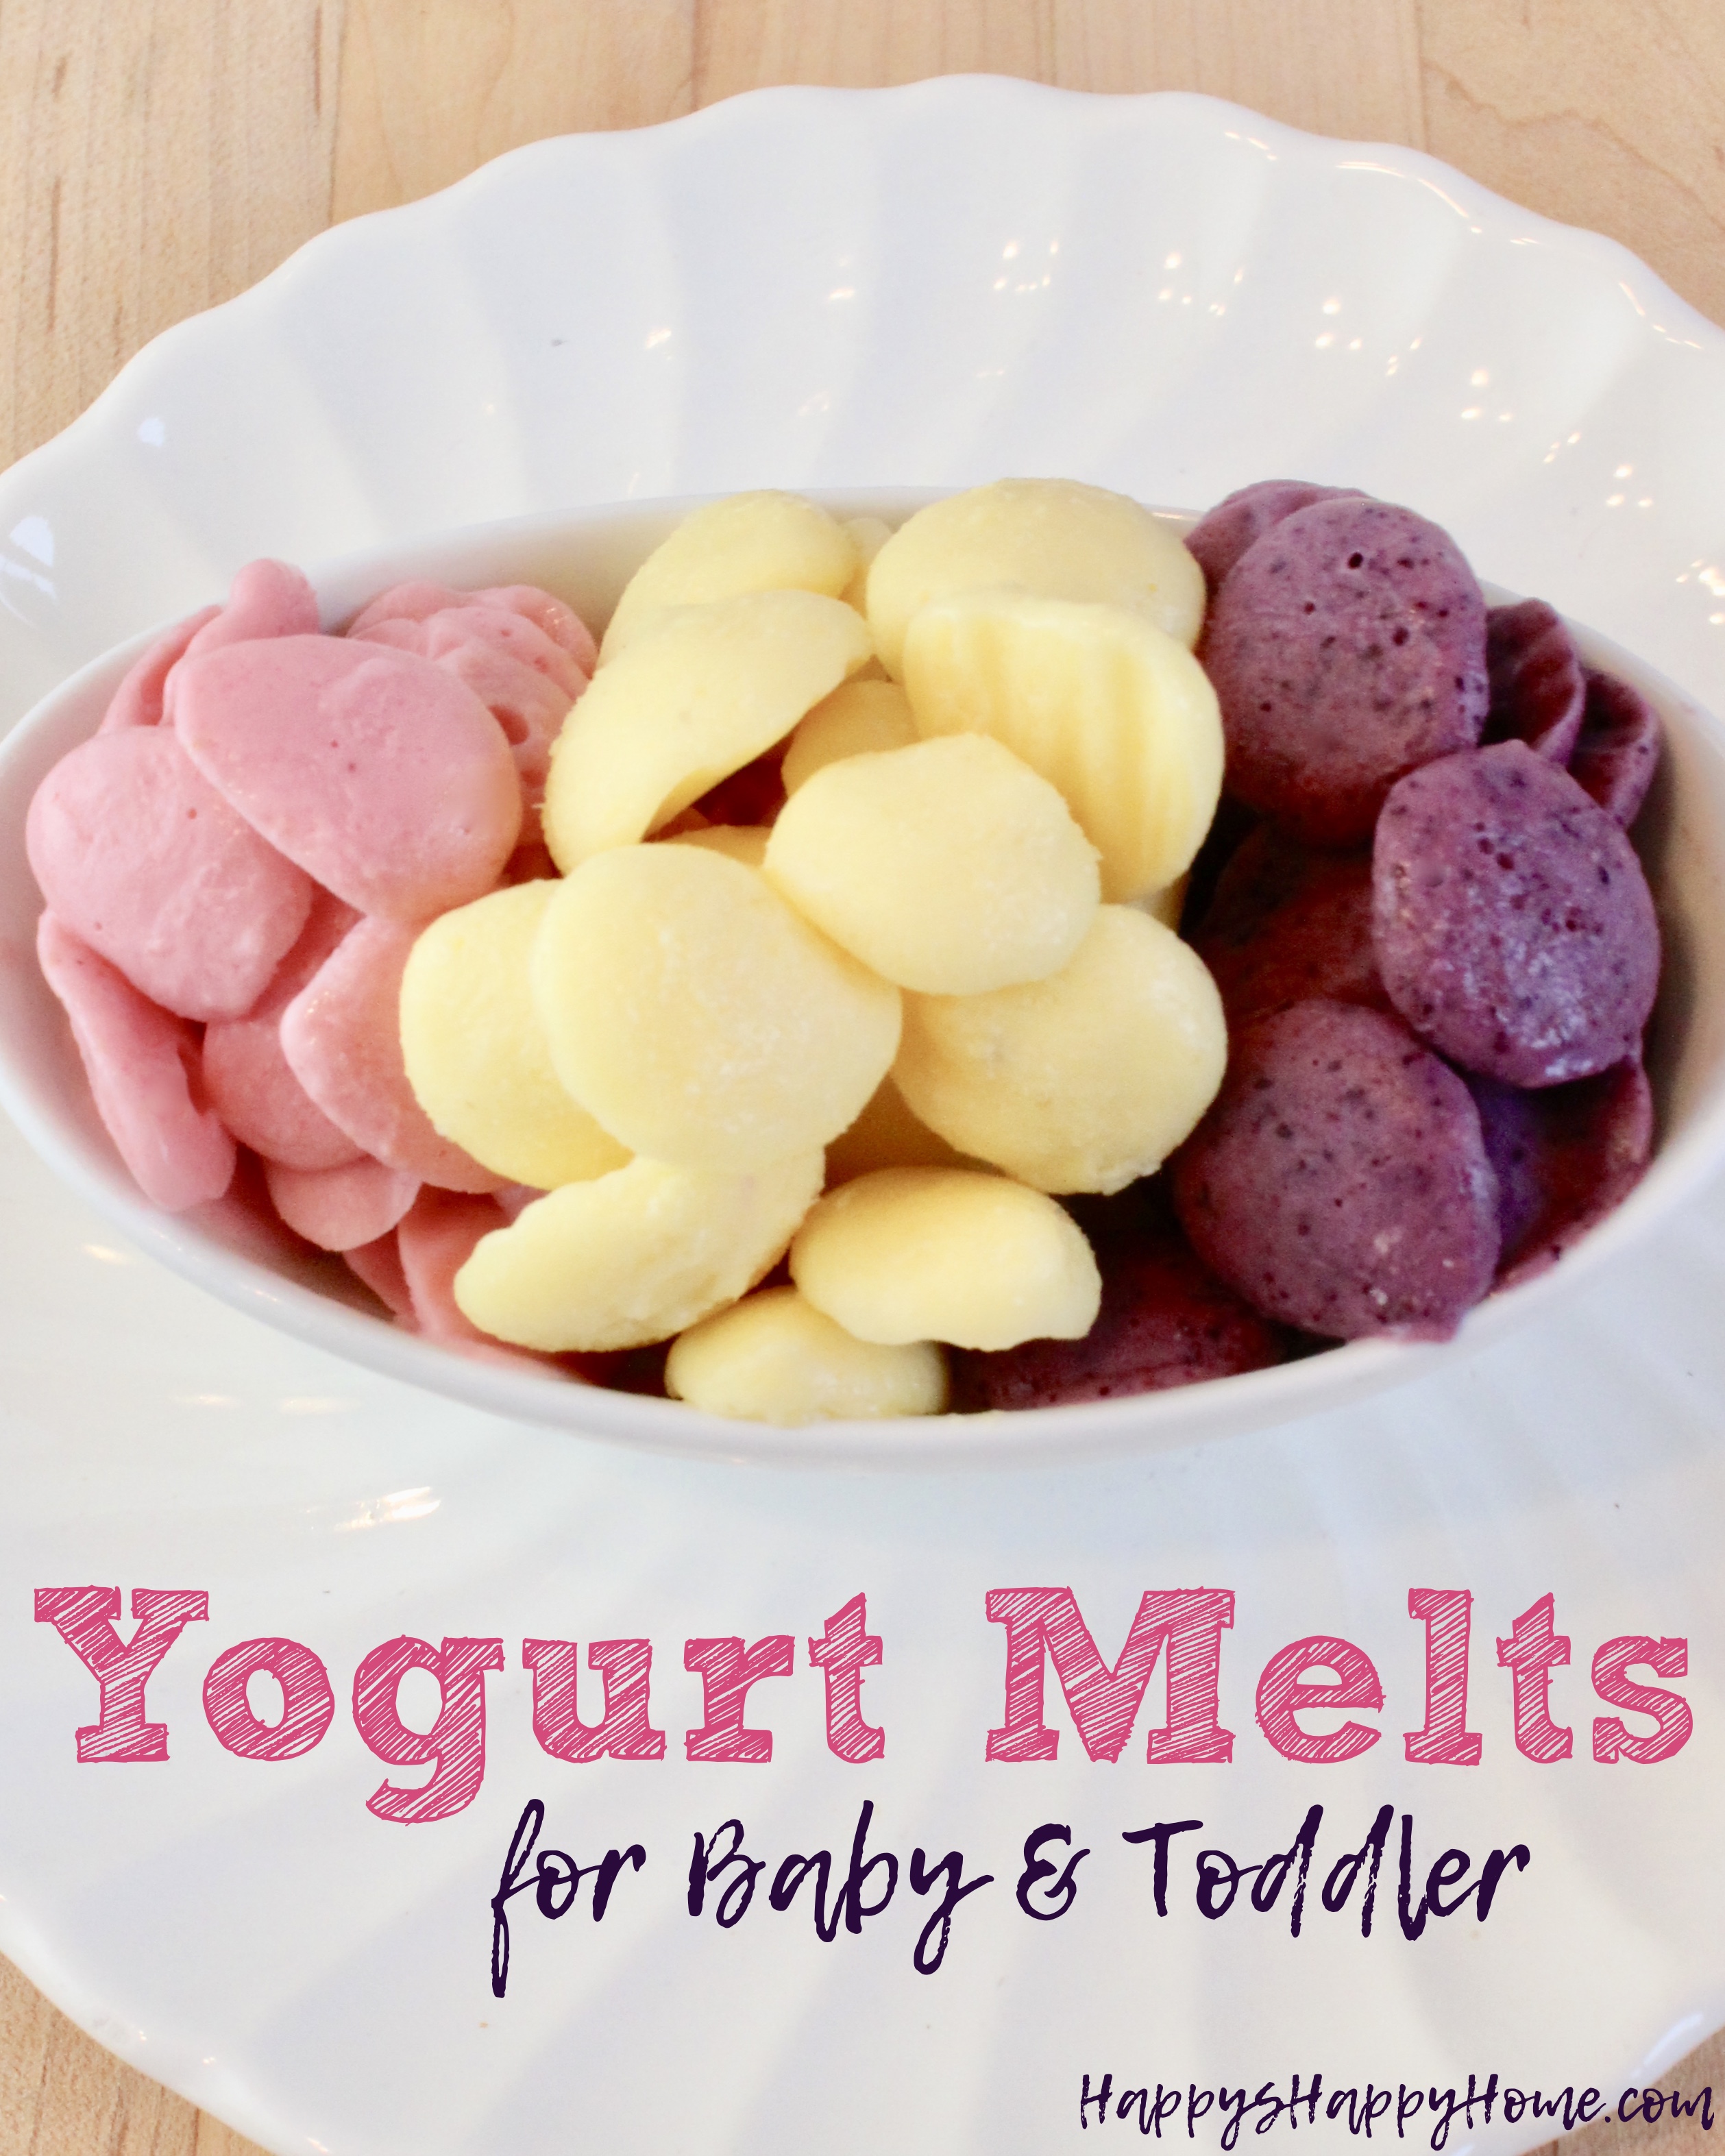 These Yogurt Melts are a healthy and sweet treat for babies and toddlers without added sugar!